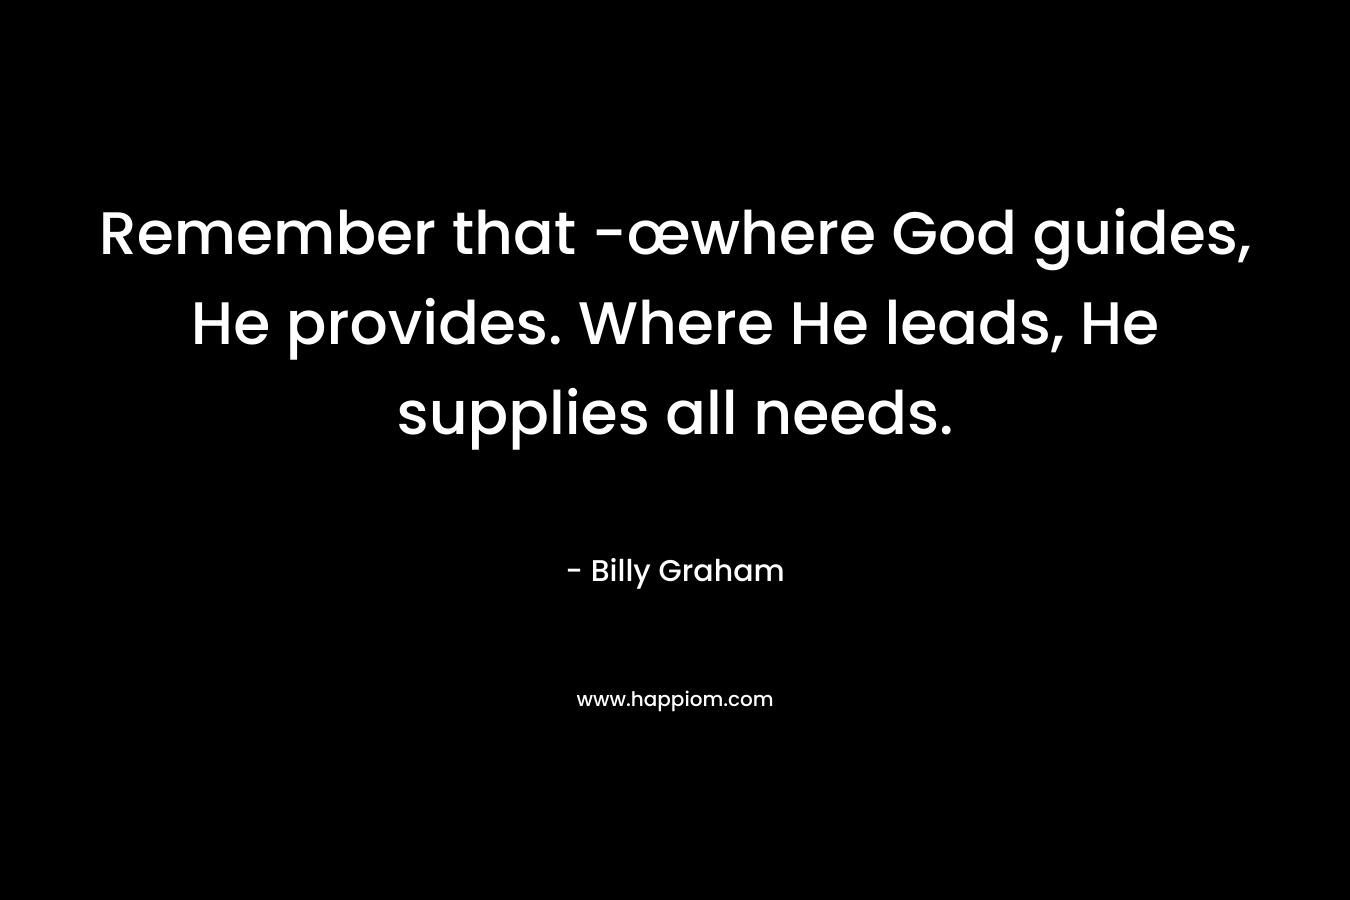 Remember that -œwhere God guides, He provides. Where He leads, He supplies all needs.